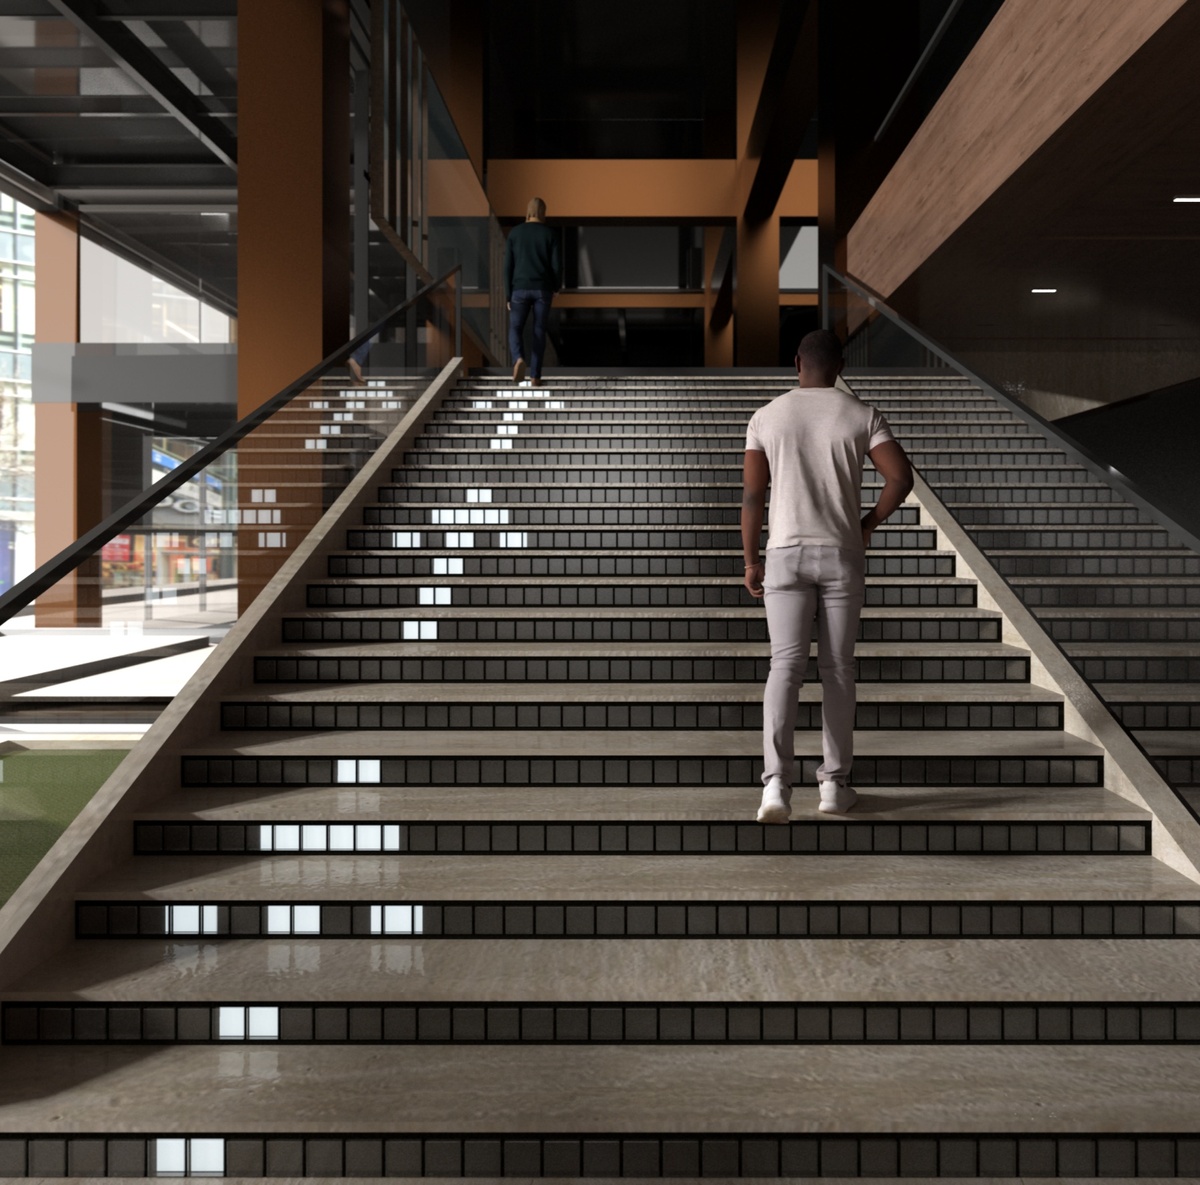 Man walking up staircase with arrows moving up risers to the left hand side